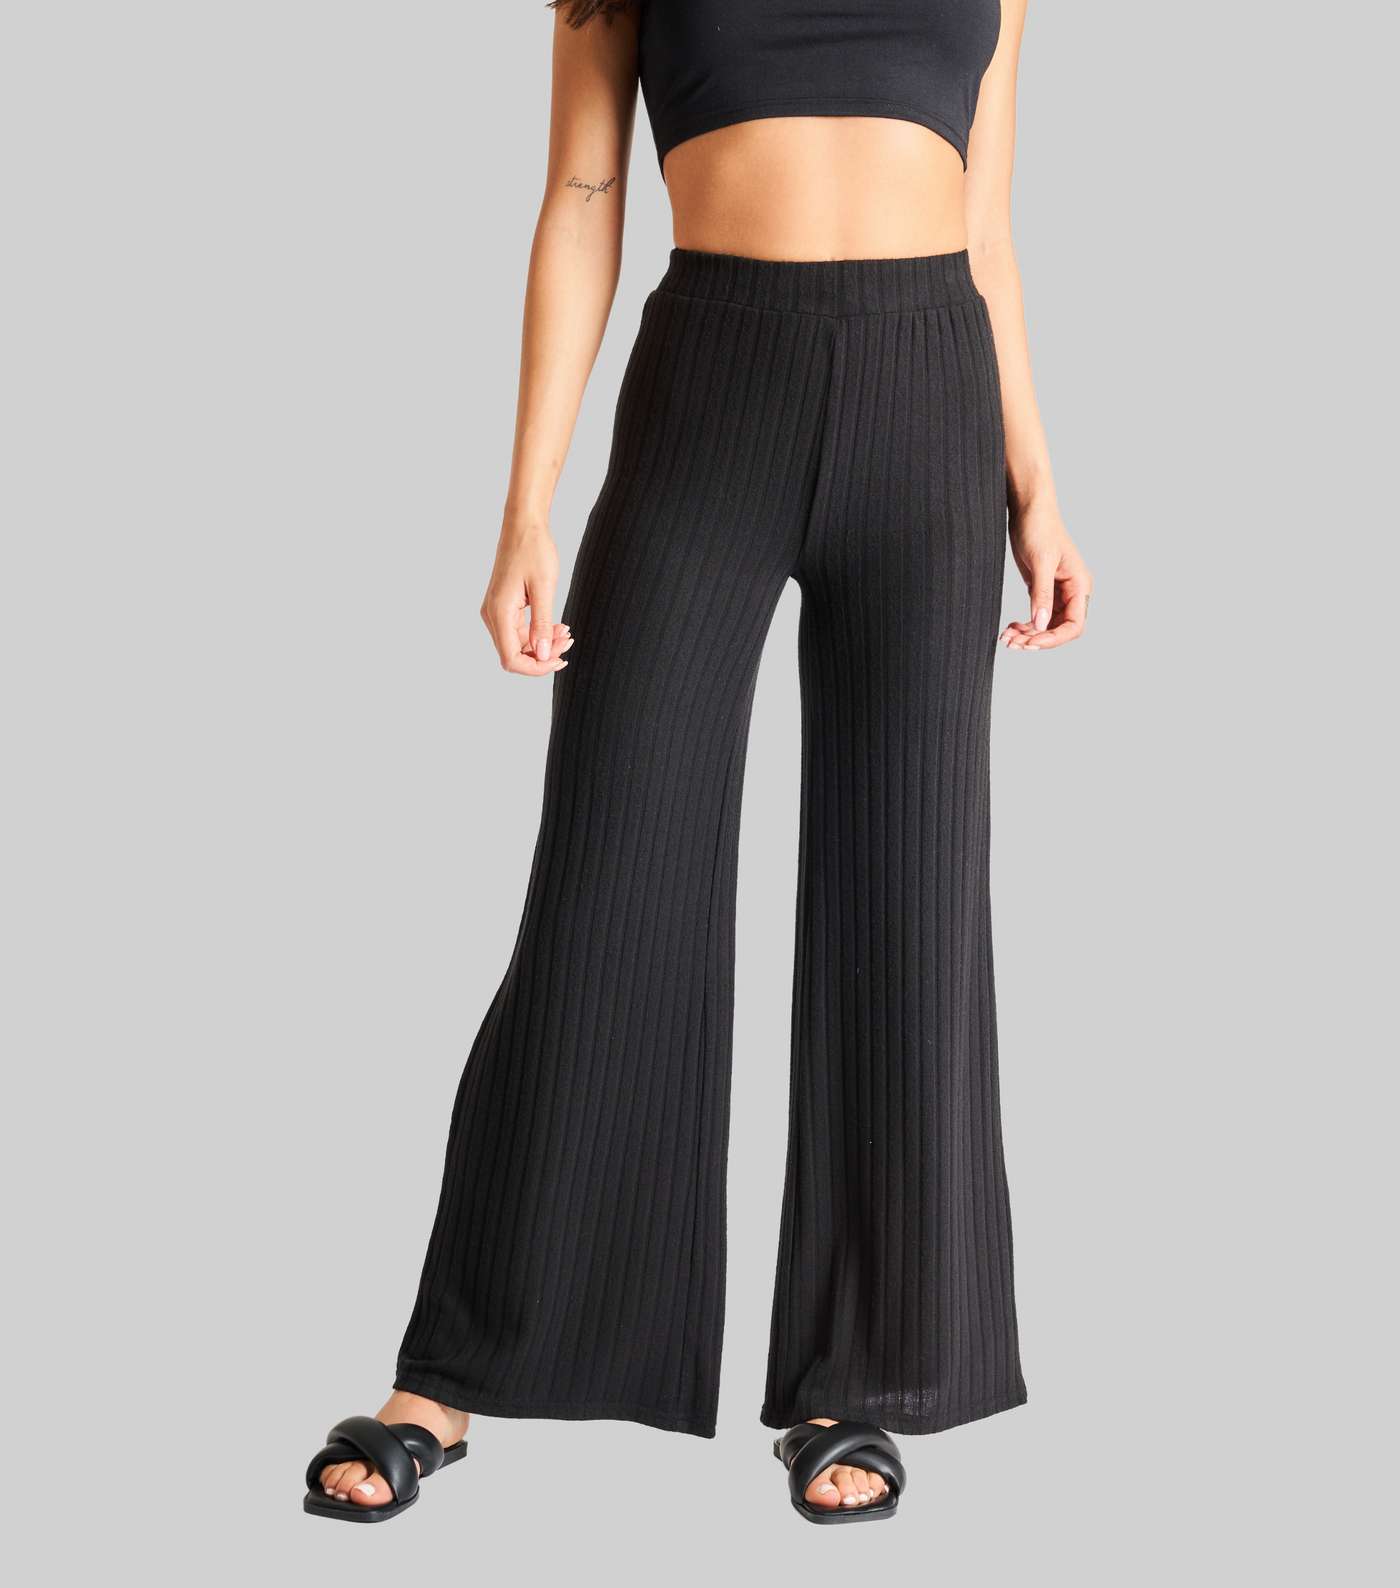 South Beach Black Ribbed Knit High Waist Wide Leg Trousers Image 2